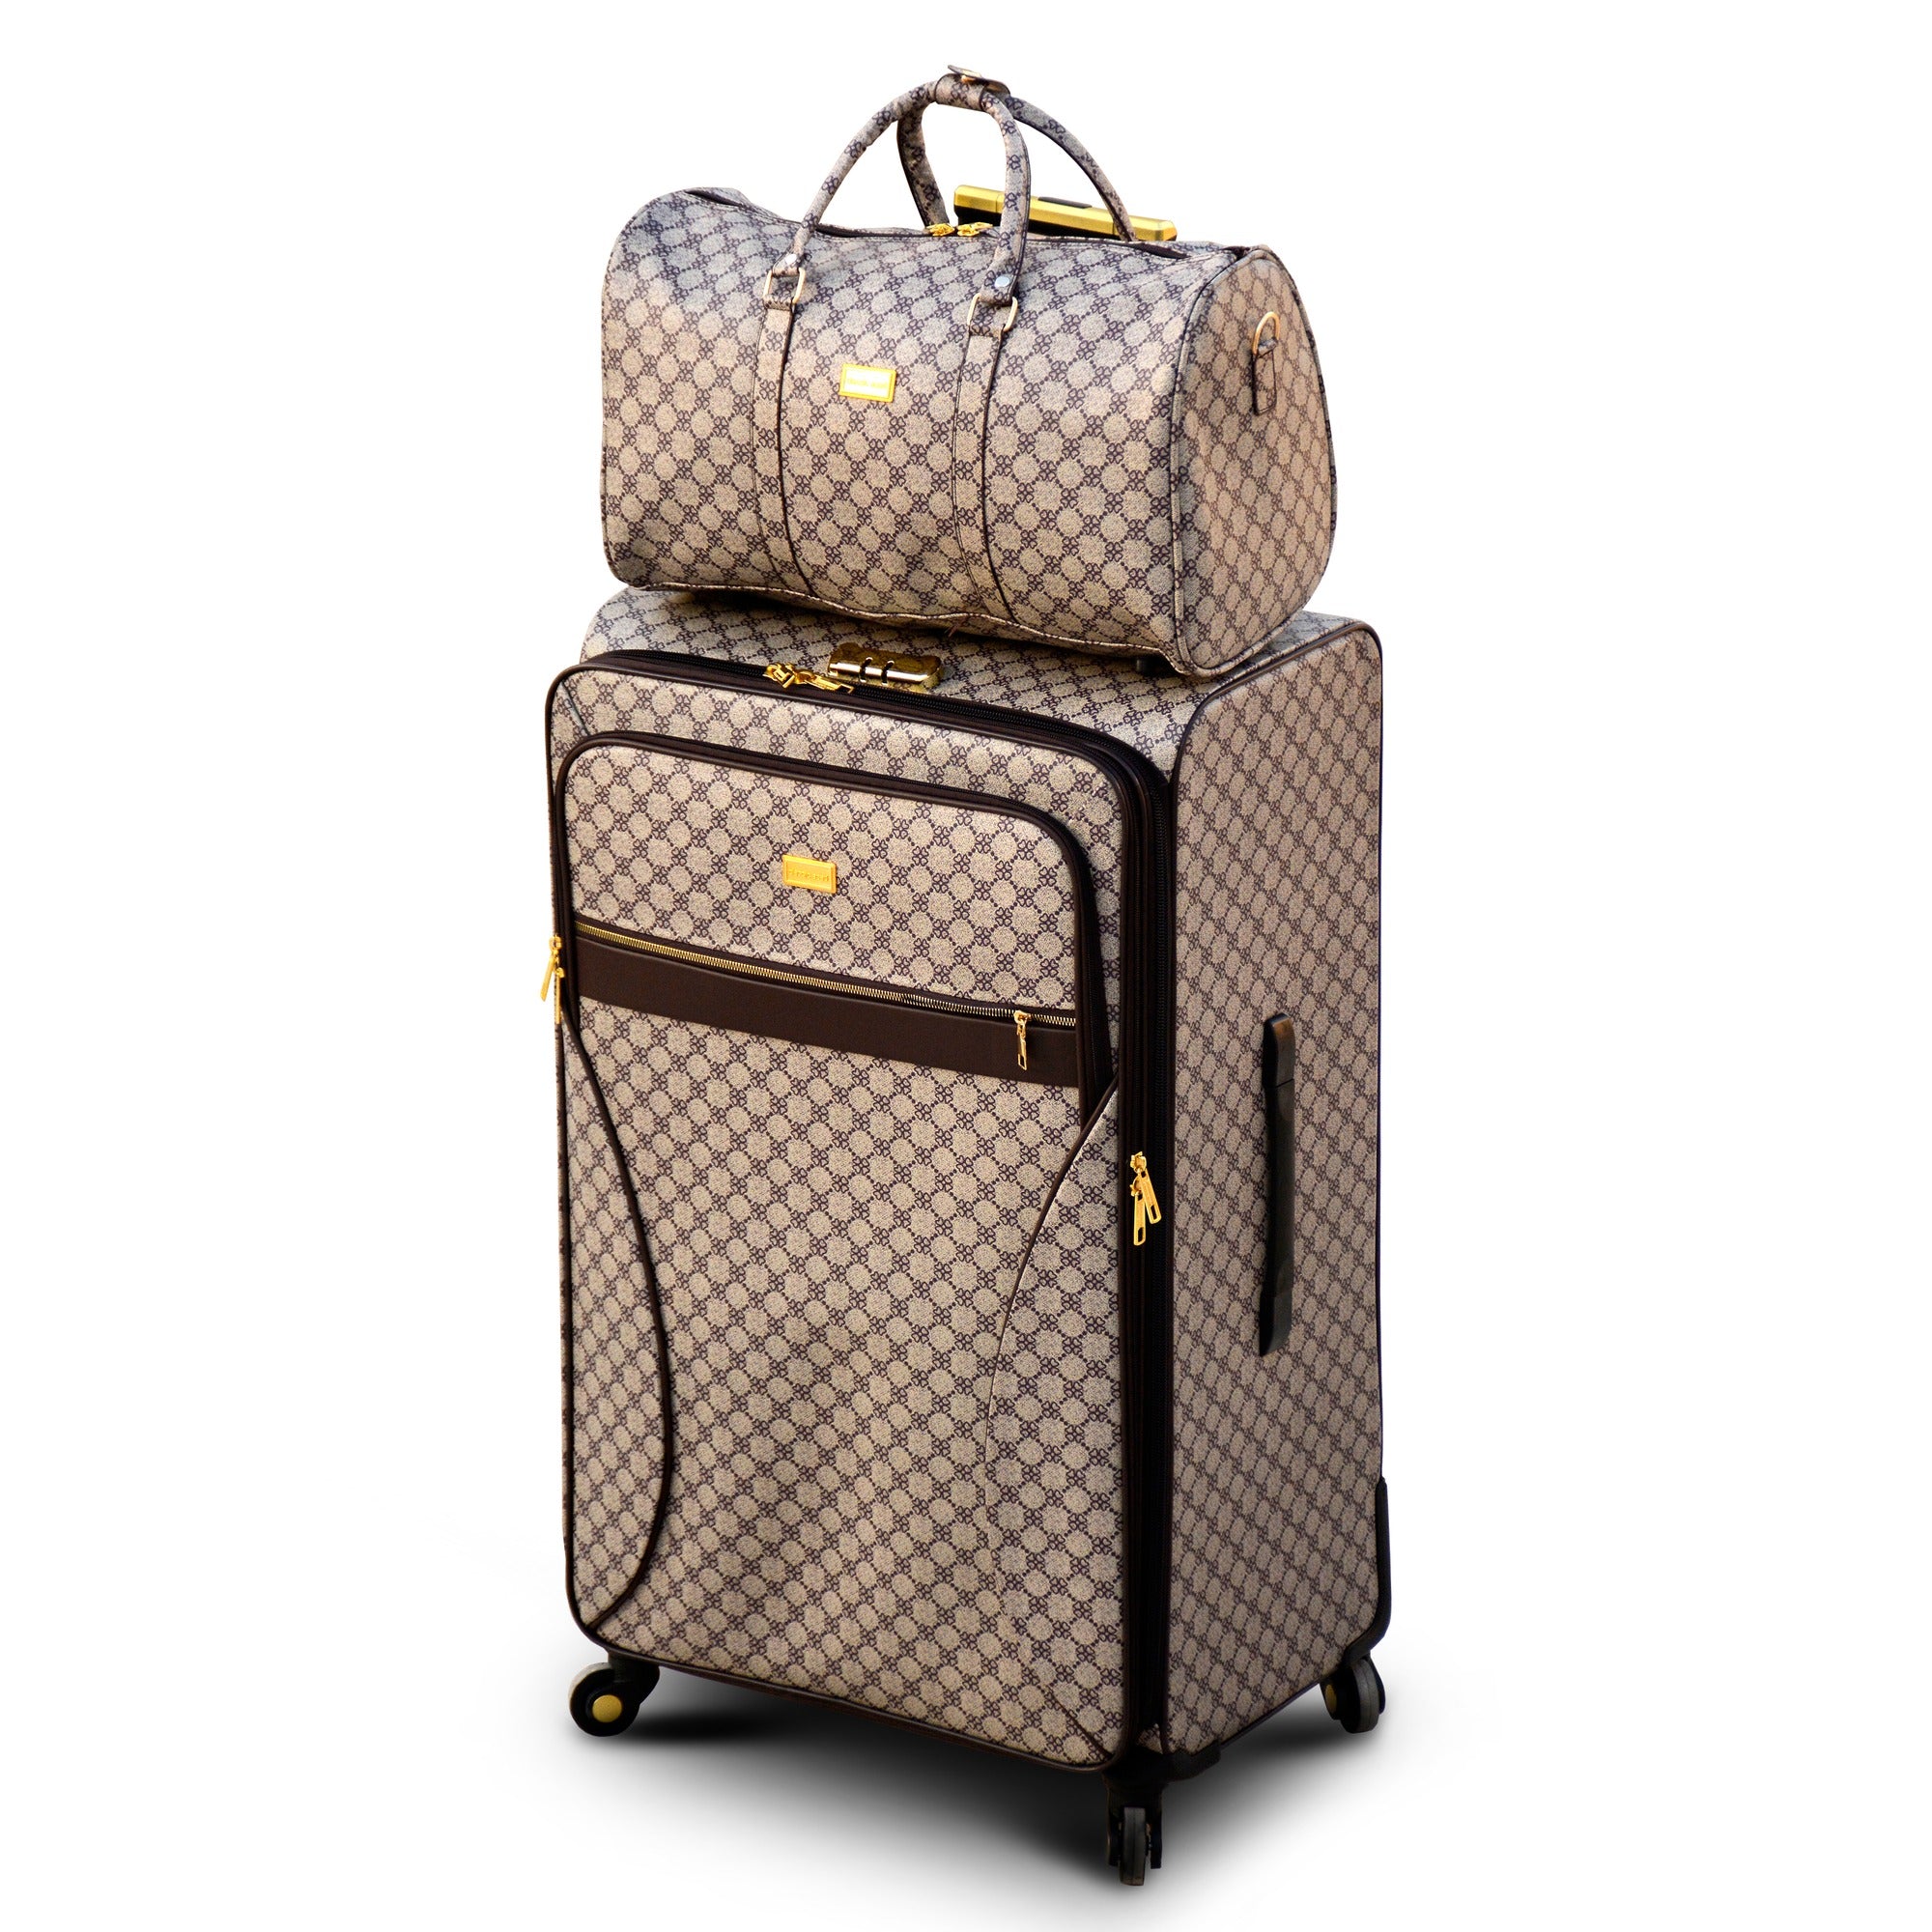 VL PU Leather Material Luggage | 4 Pcs Full Set Soft shell Four Wheel Trolley Bag